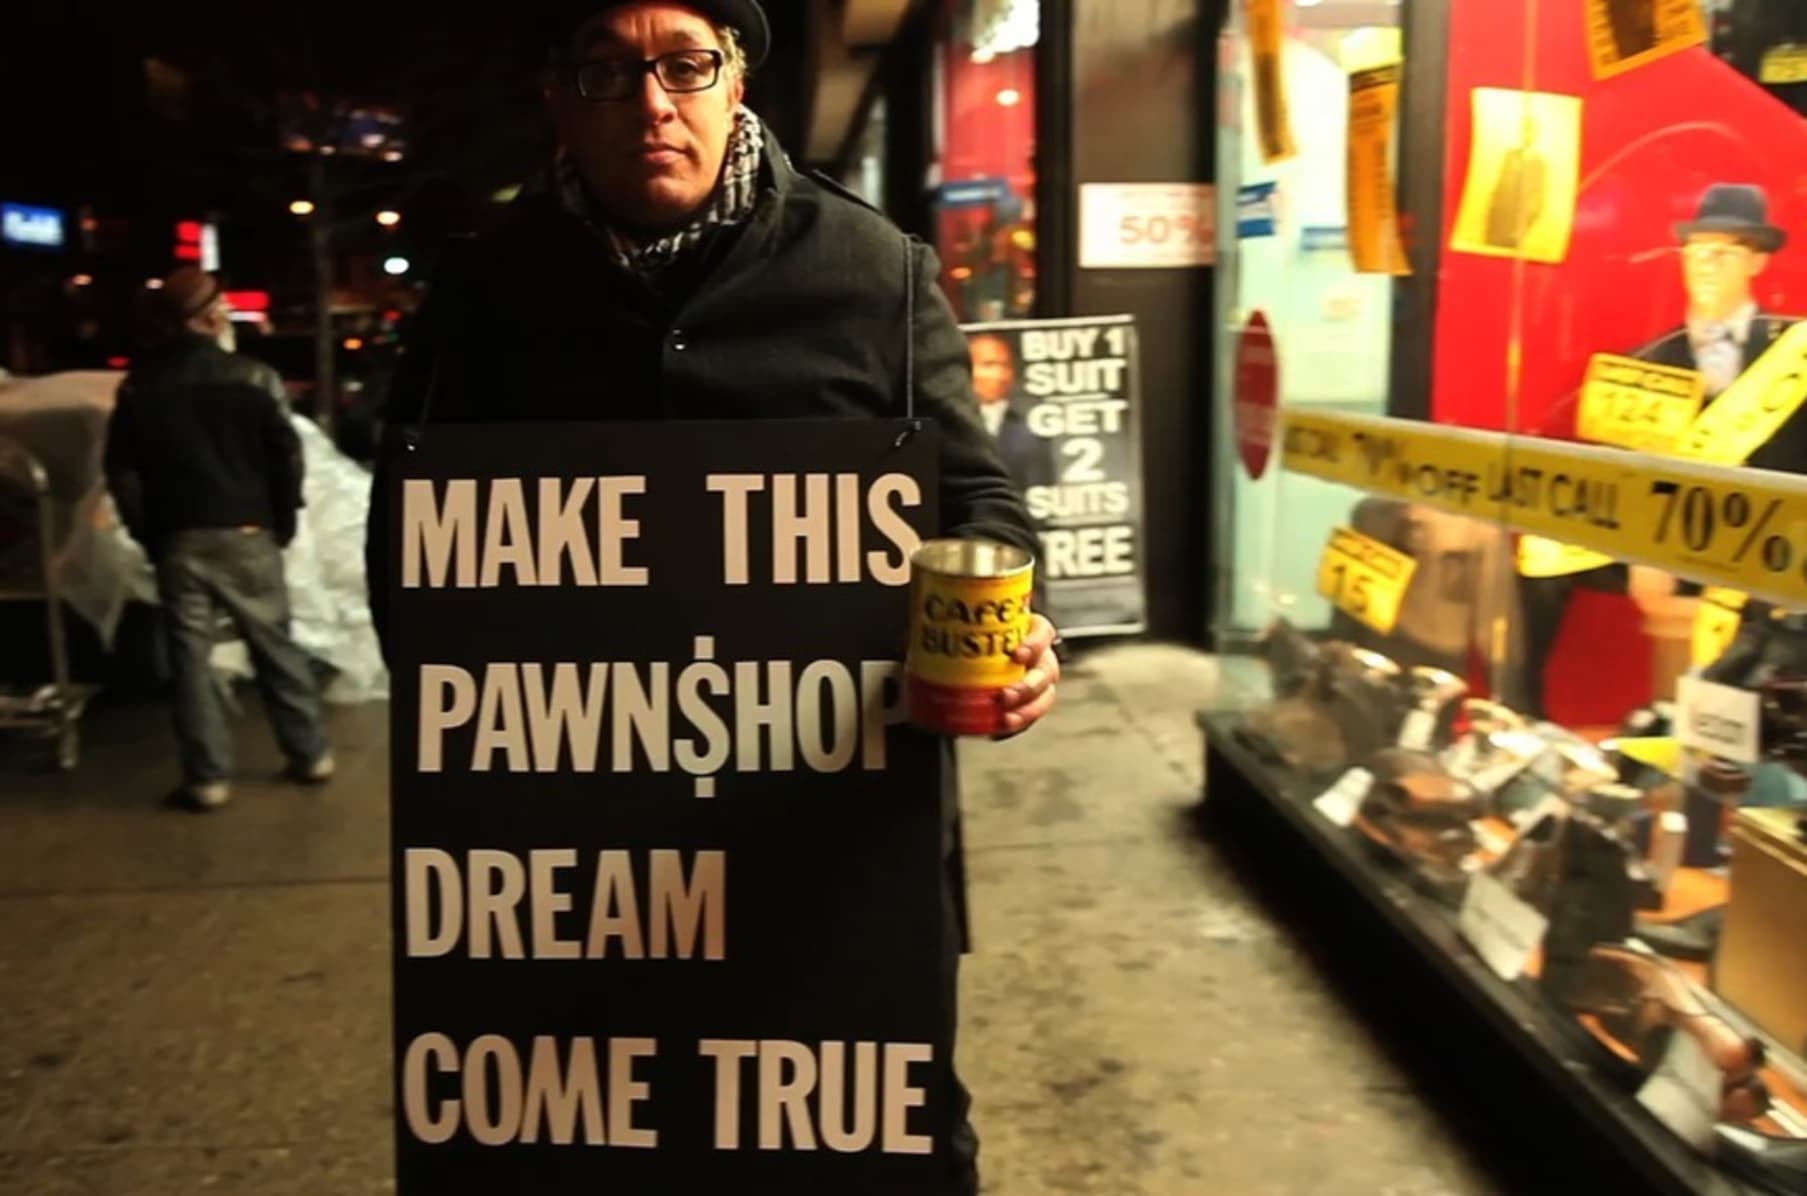 The Pawnshop Dream - What Does It Mean to Dream About a Pawnshop